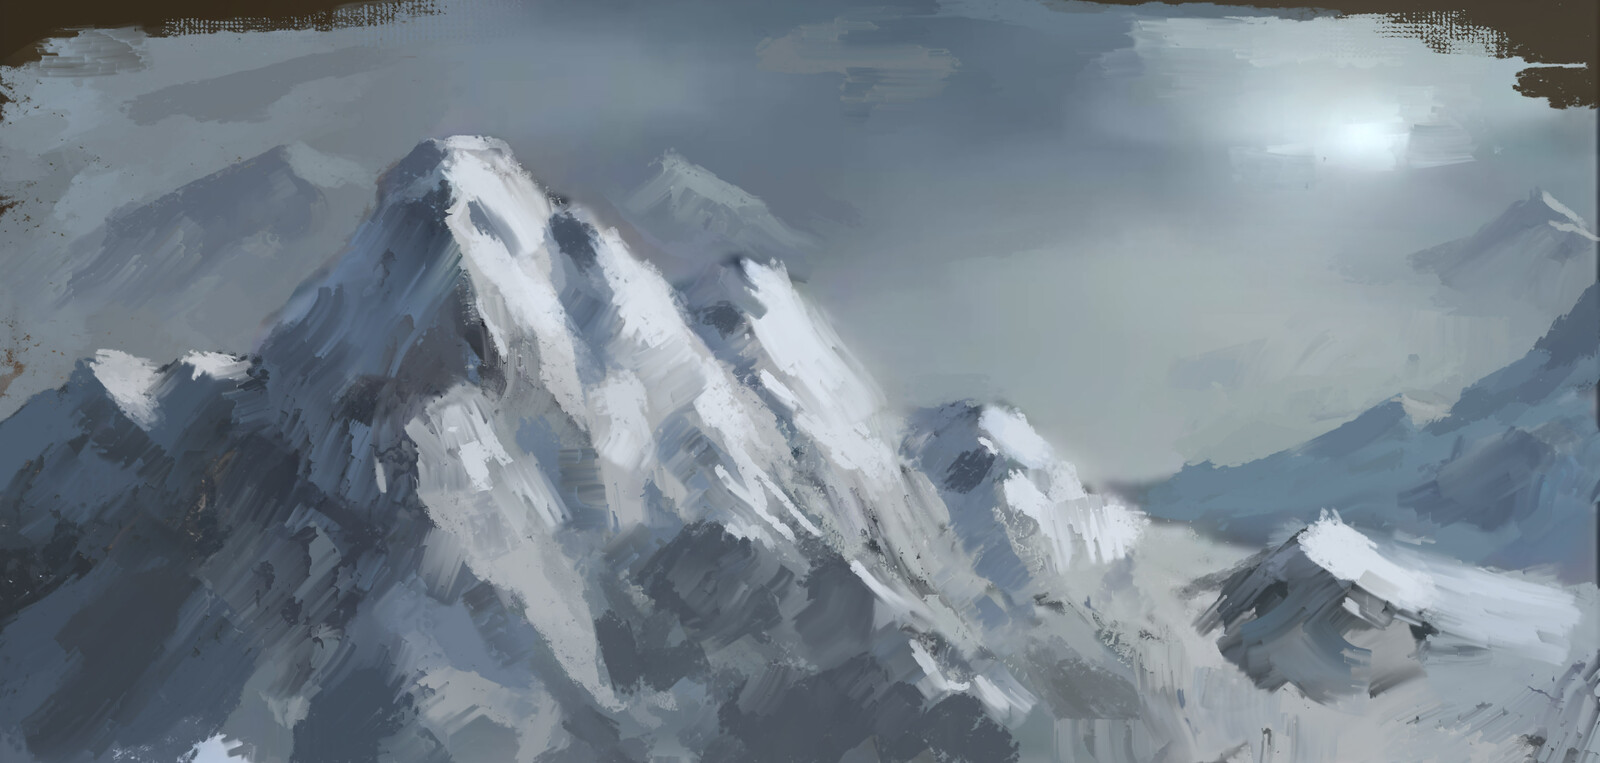 Mountaint Scenery - Digital Oil Painting